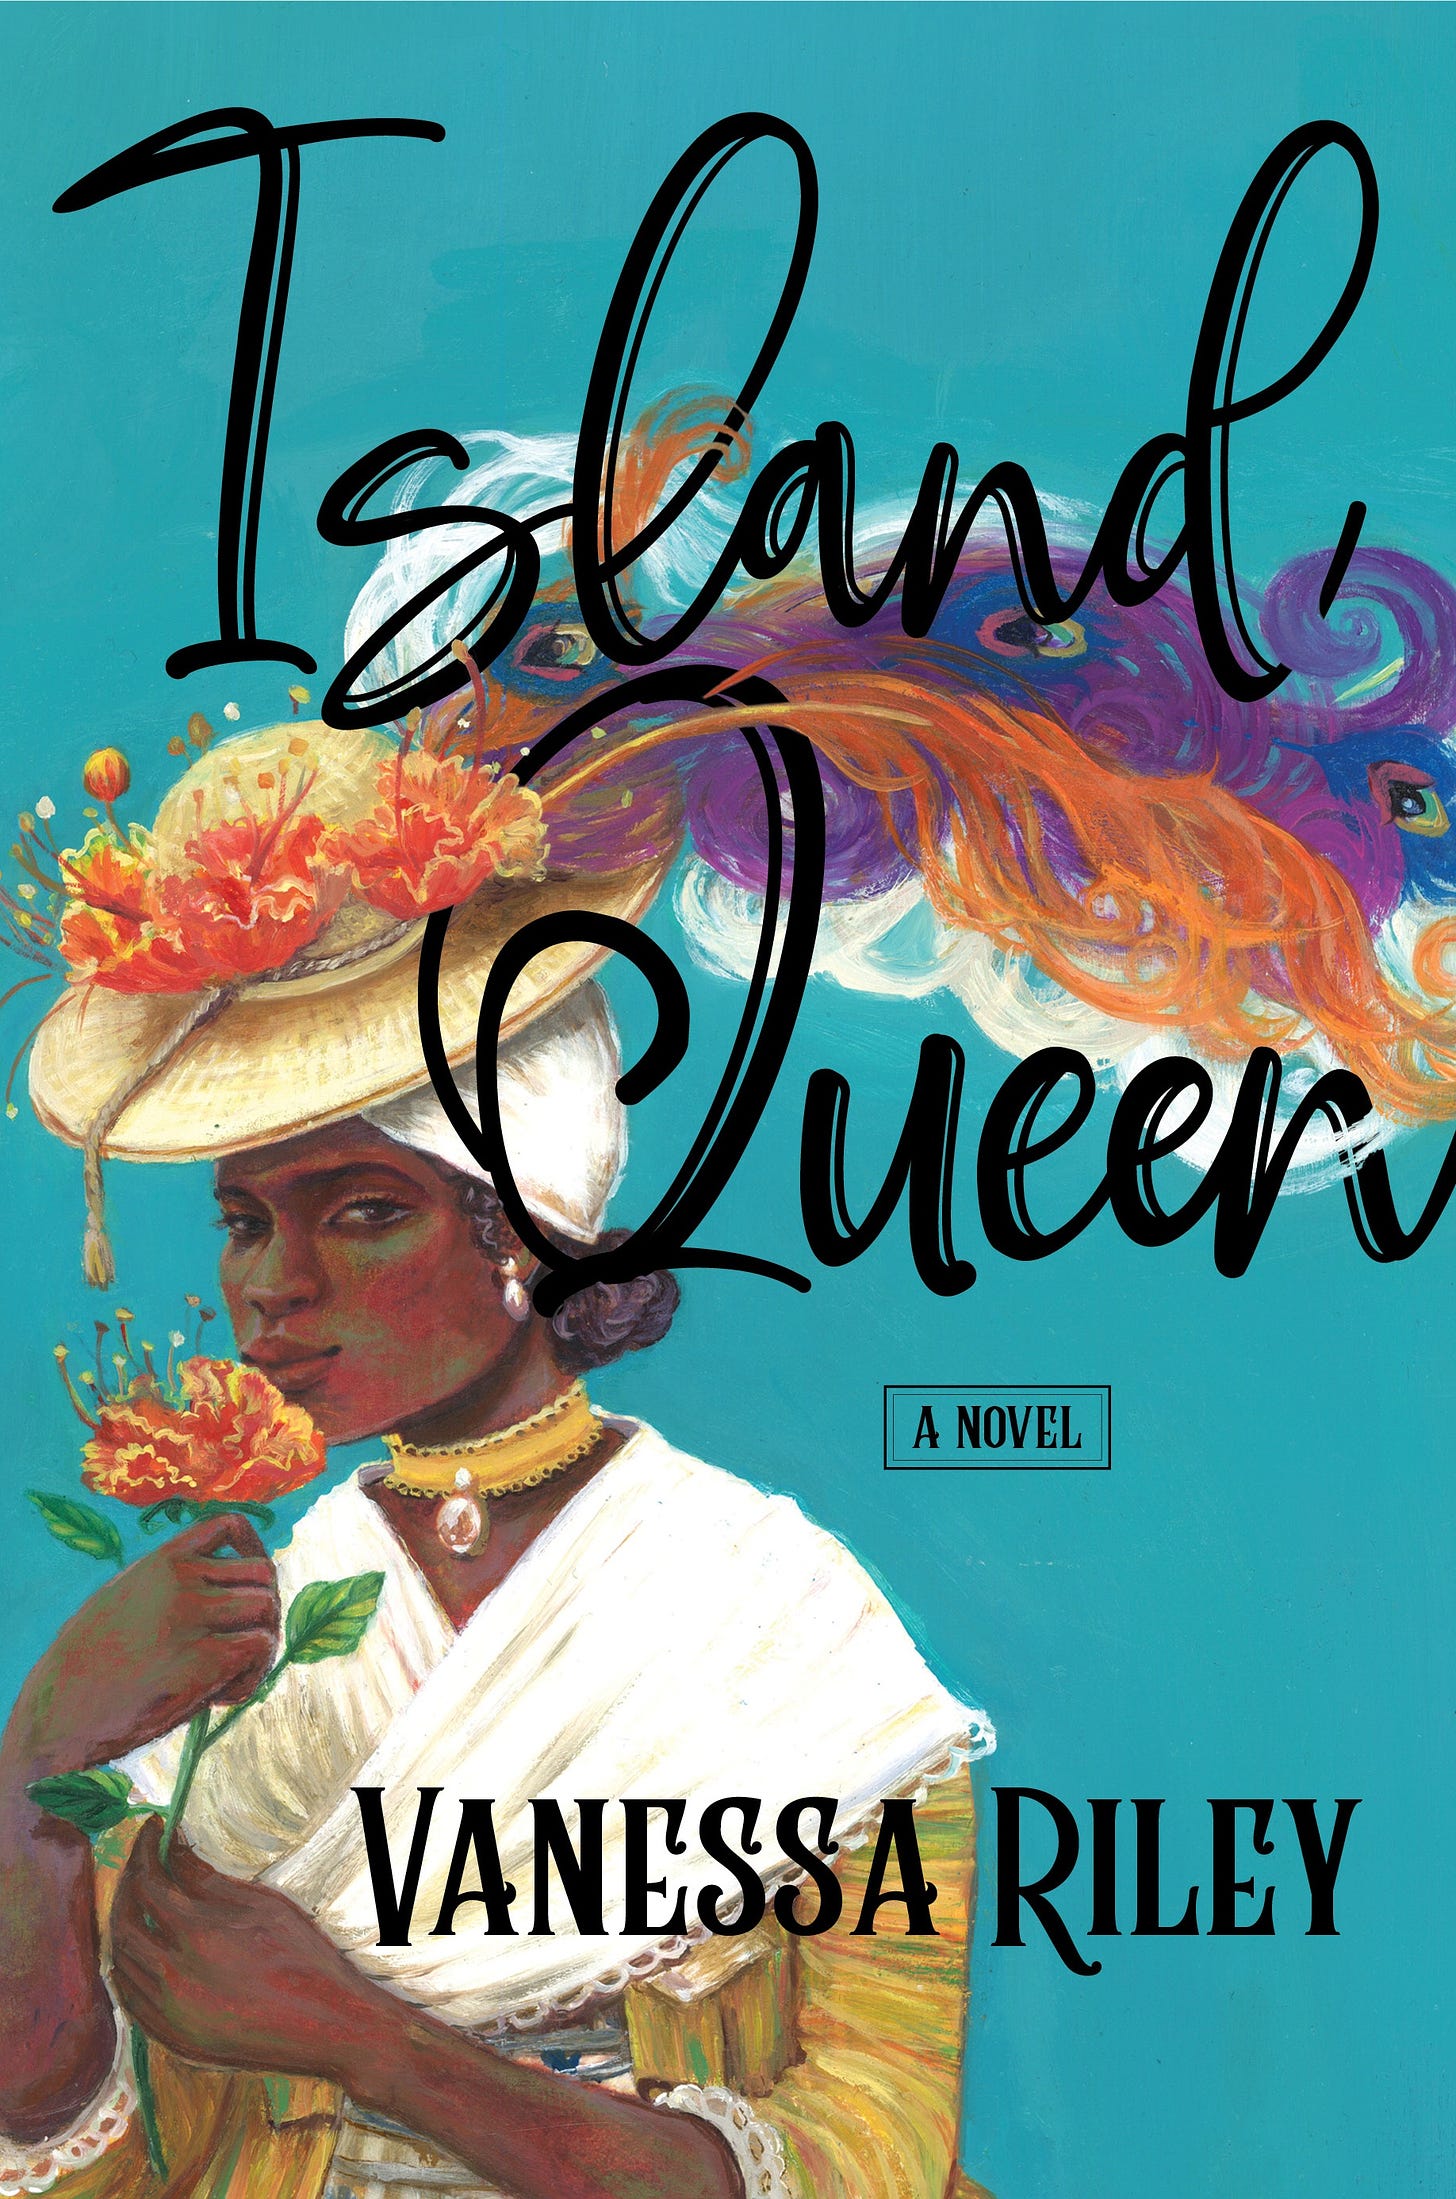 The cover of the book 'Island Queen' by Vanessa Riley, featuring a drawing of a Black Regency lady in a white gown, a gold jeweled choker necklace, and an elaborate turban and feathered hat - depicting the entrepreneur Dorothy Kirwan Thomas whose life inspires this story by Vanessa Riley.